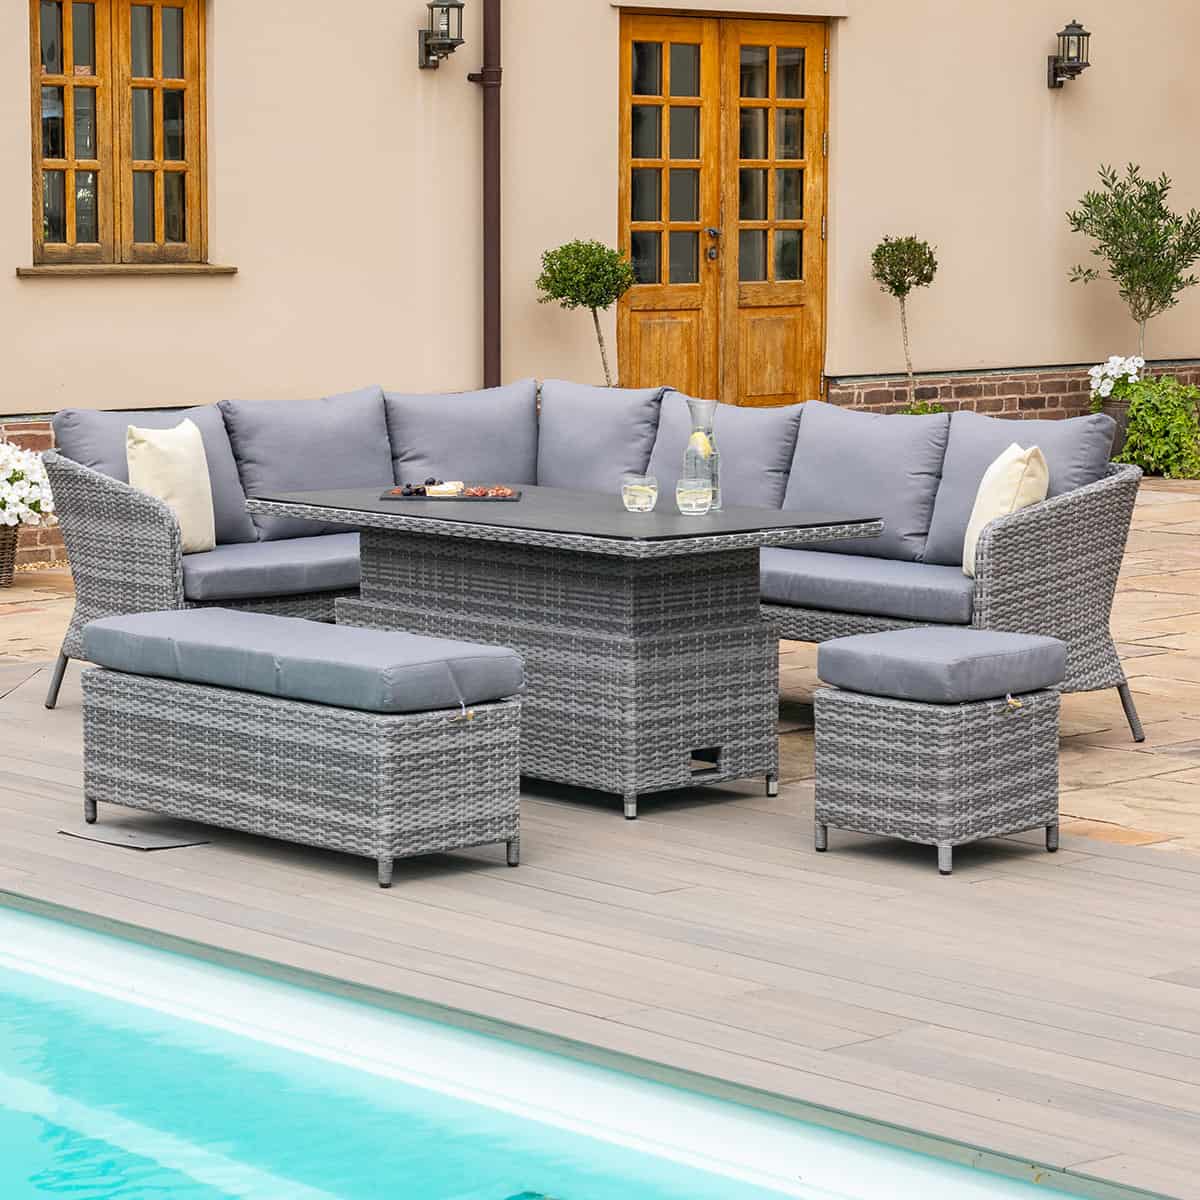 Grey rattan casual corner dining set with rectangular rising table, bench and a stool